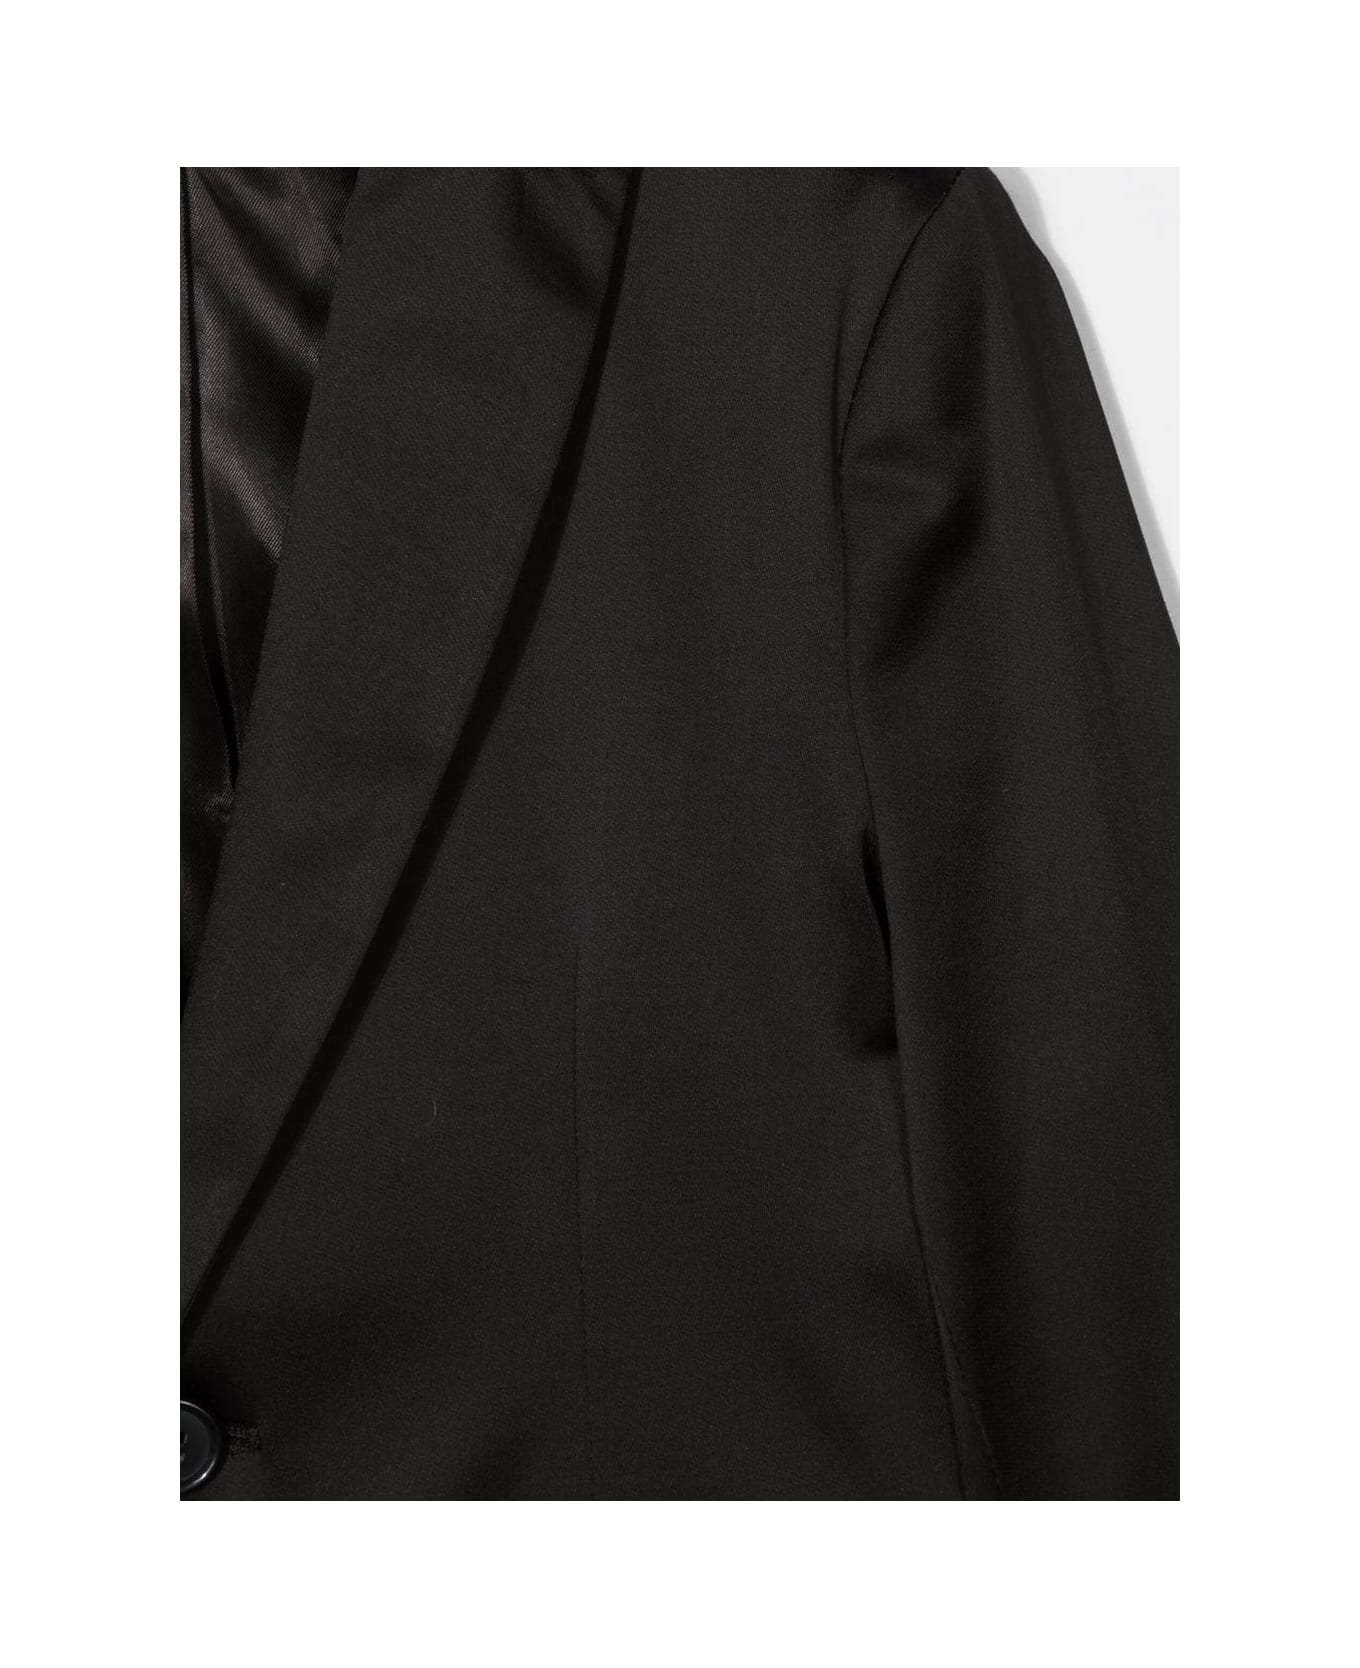 Paolo Pecora Single-breasted Fitted Blazer - Black